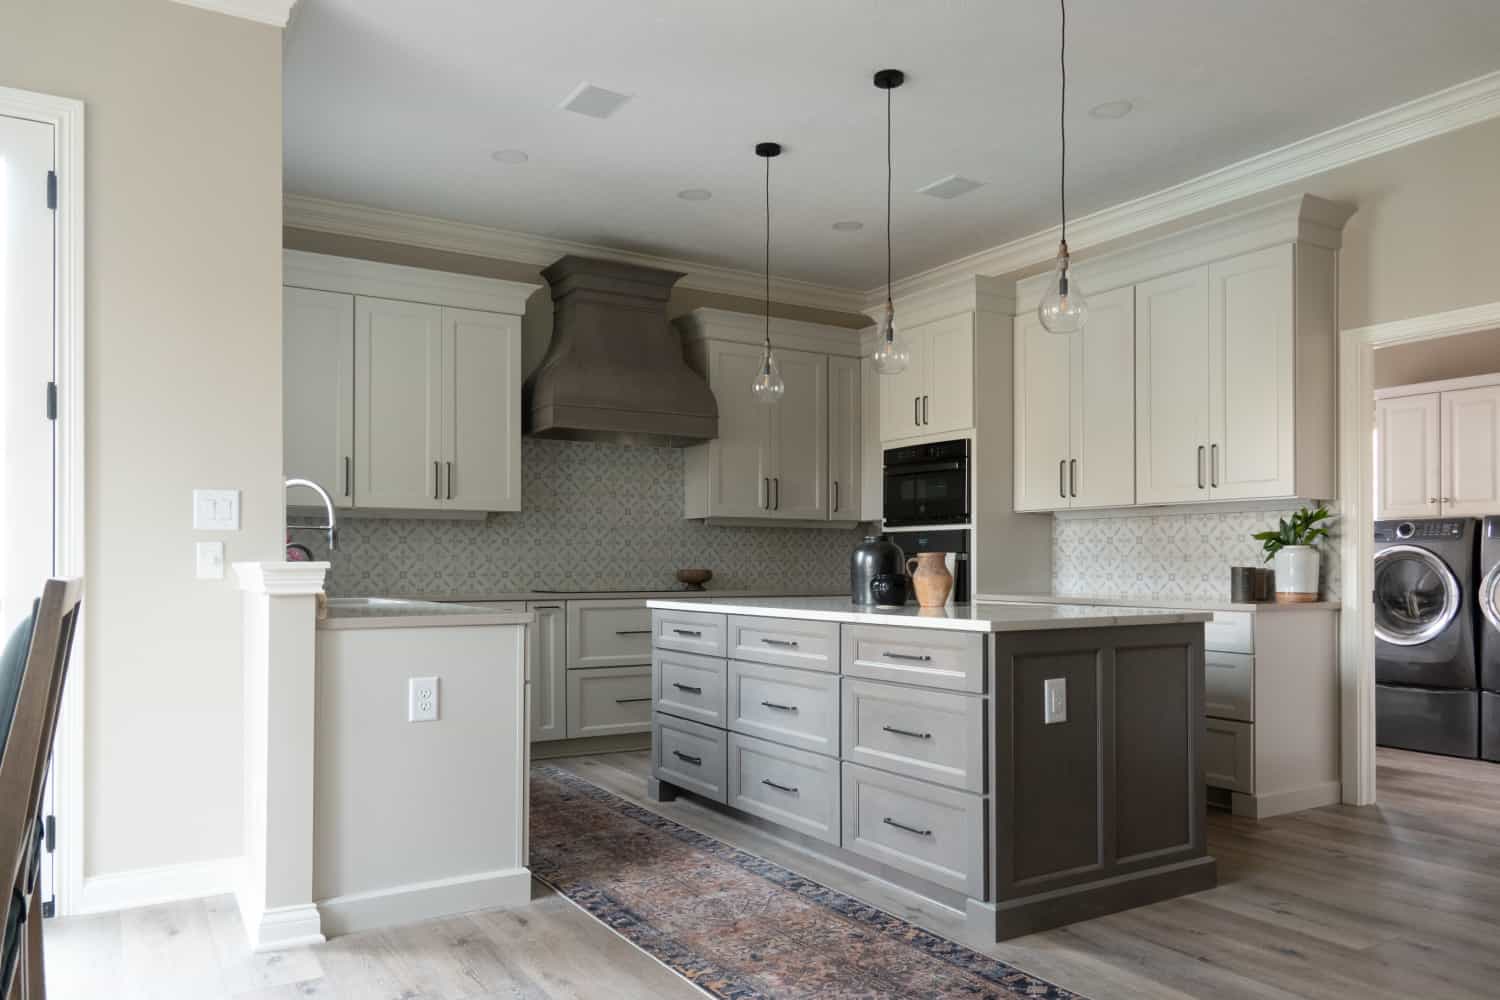 Nicholas Design Build | Remodel the kitchen with a center island and white cabinets.